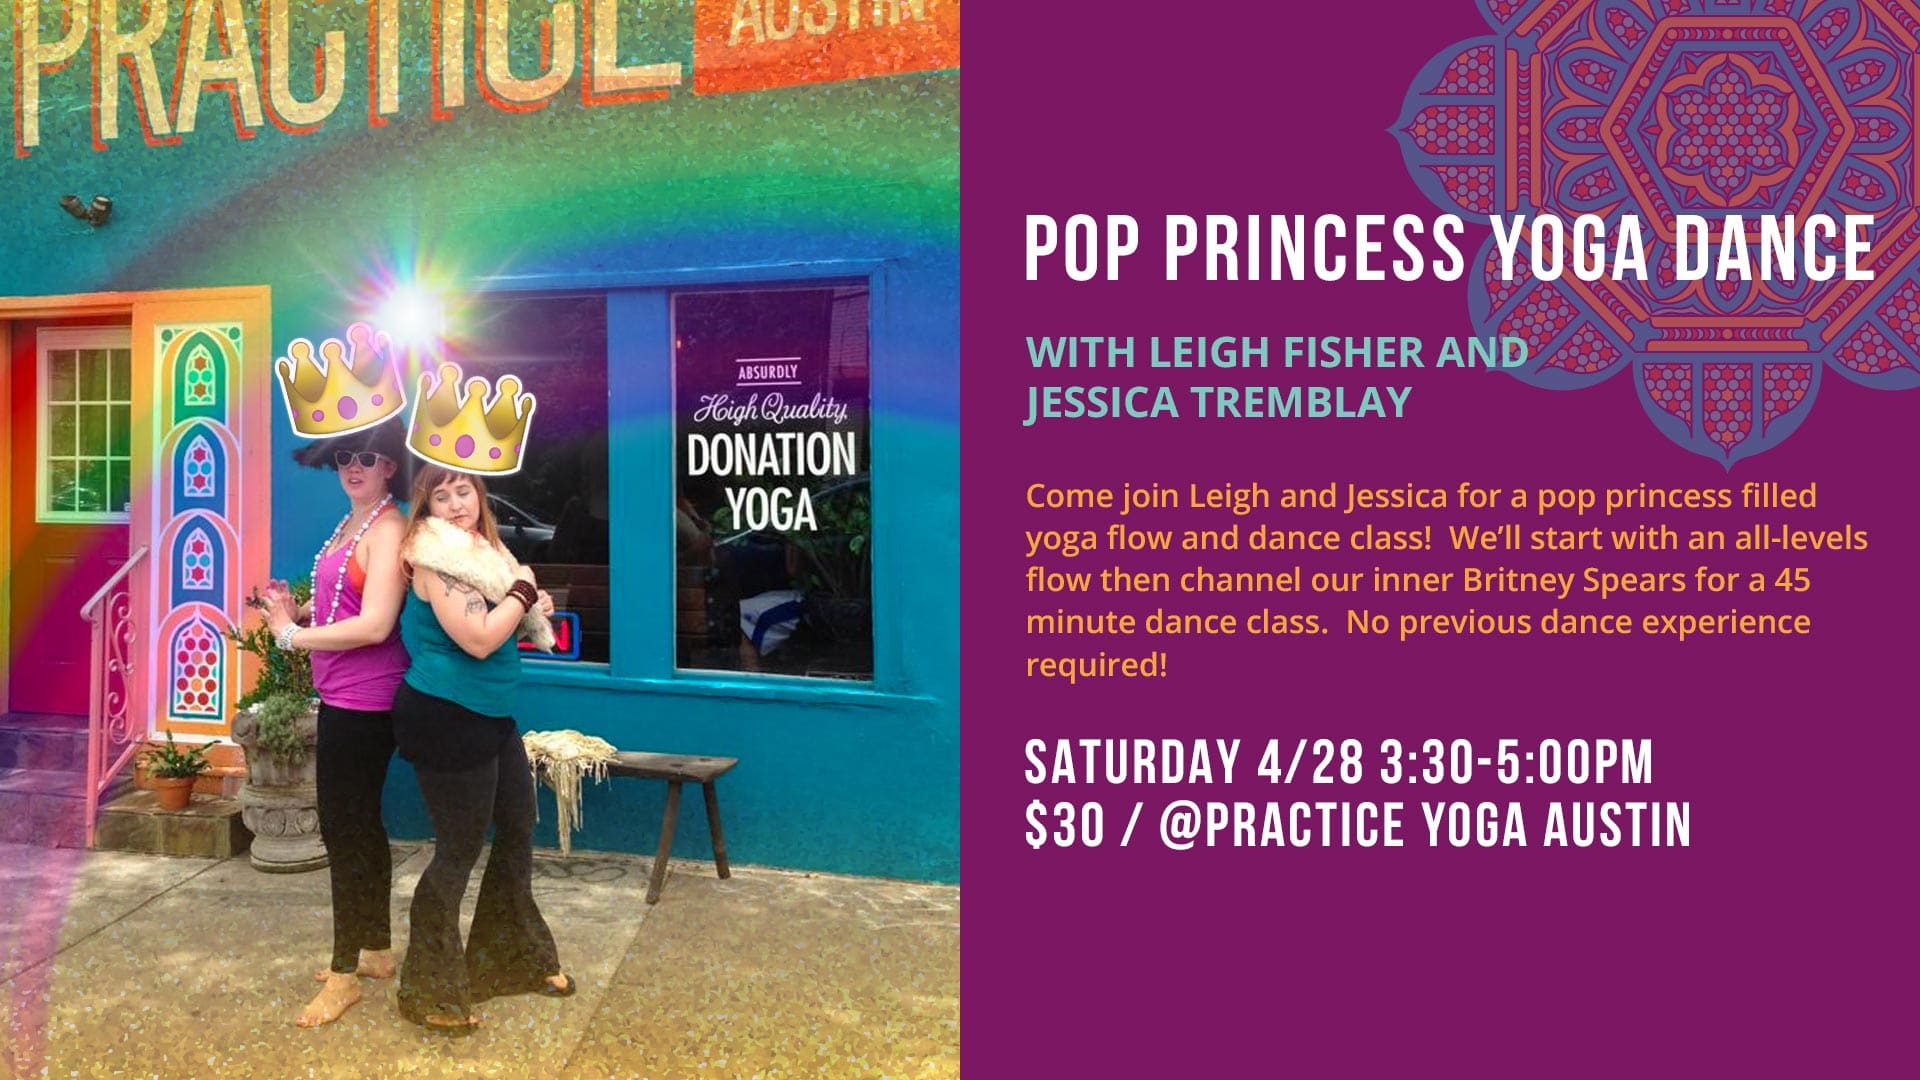 Pop Princess Yoga Dance with Leigh Fisher and Jessica Tremblay